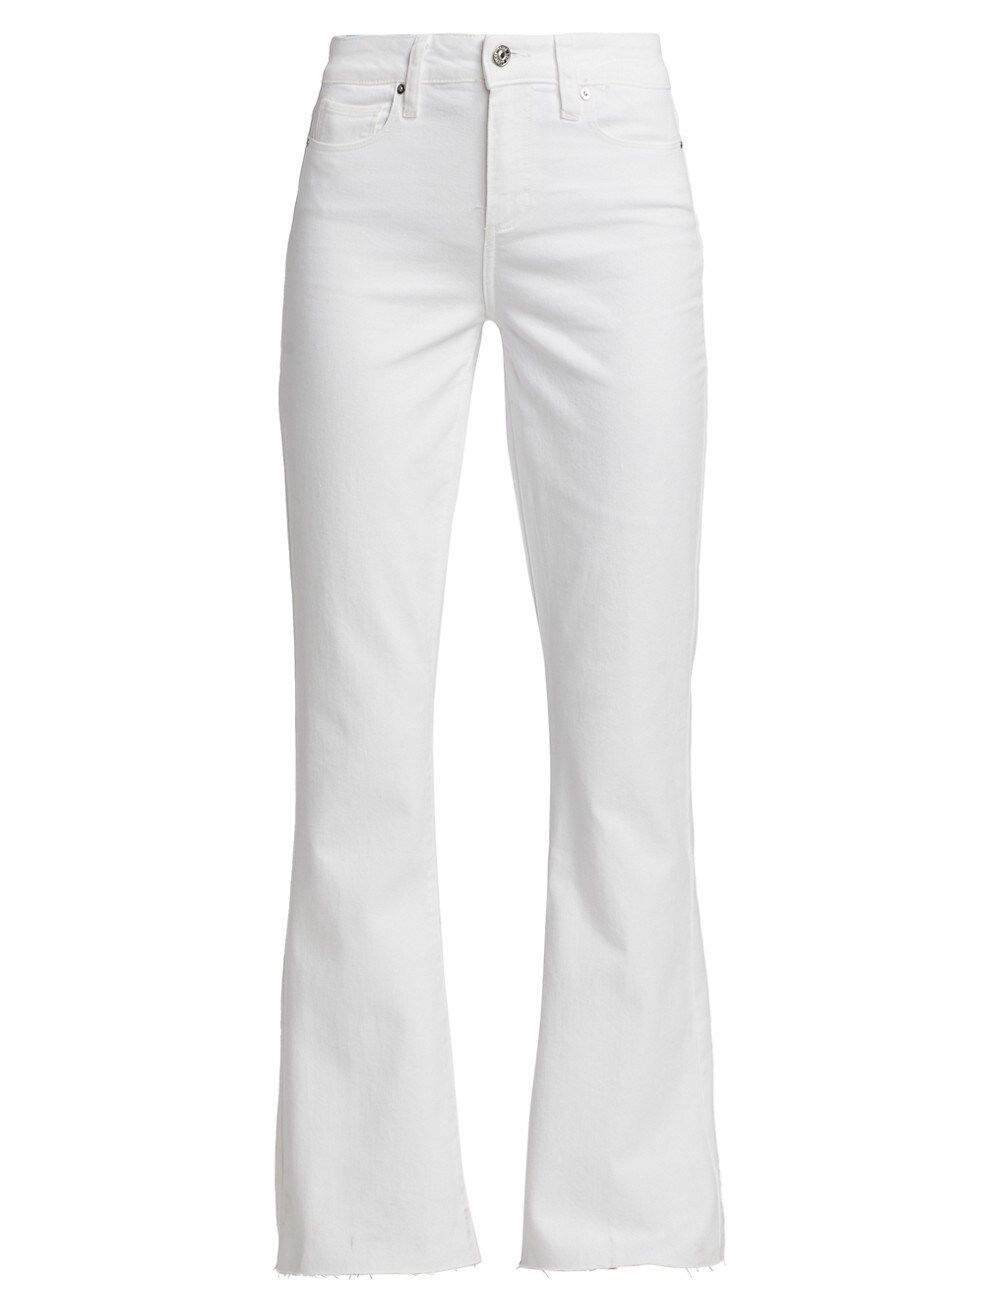 Paige Flared Laurel Canyon Jeans | Saks Fifth Avenue